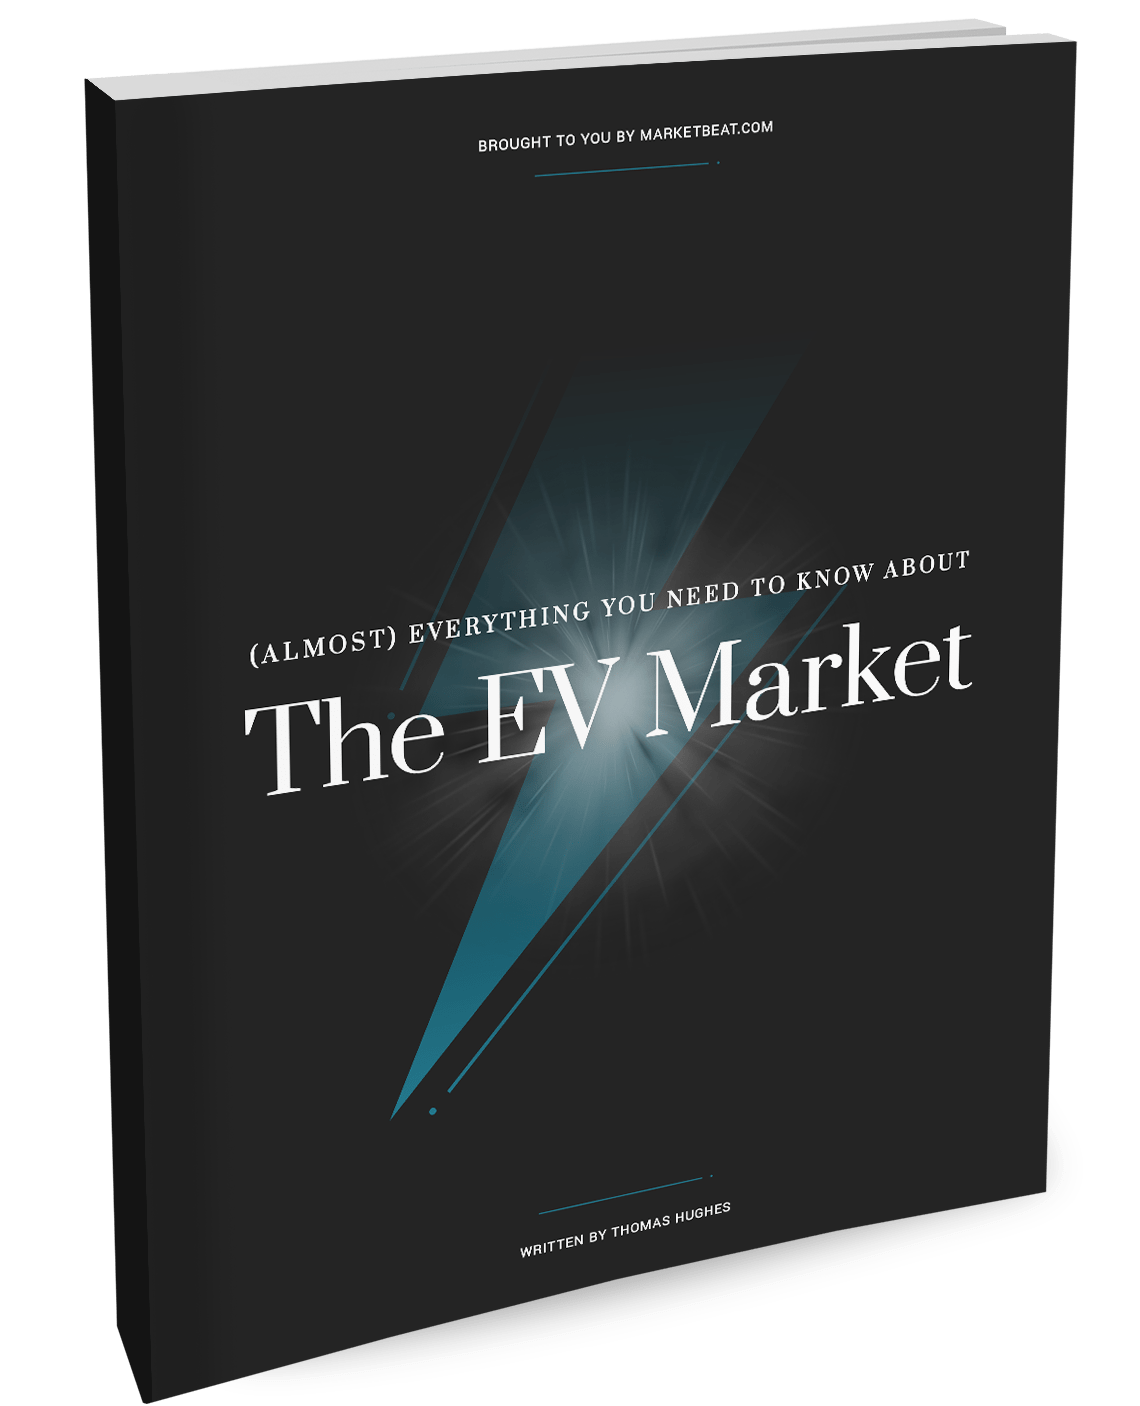 (Almost) Everything you need to know about the EV Market